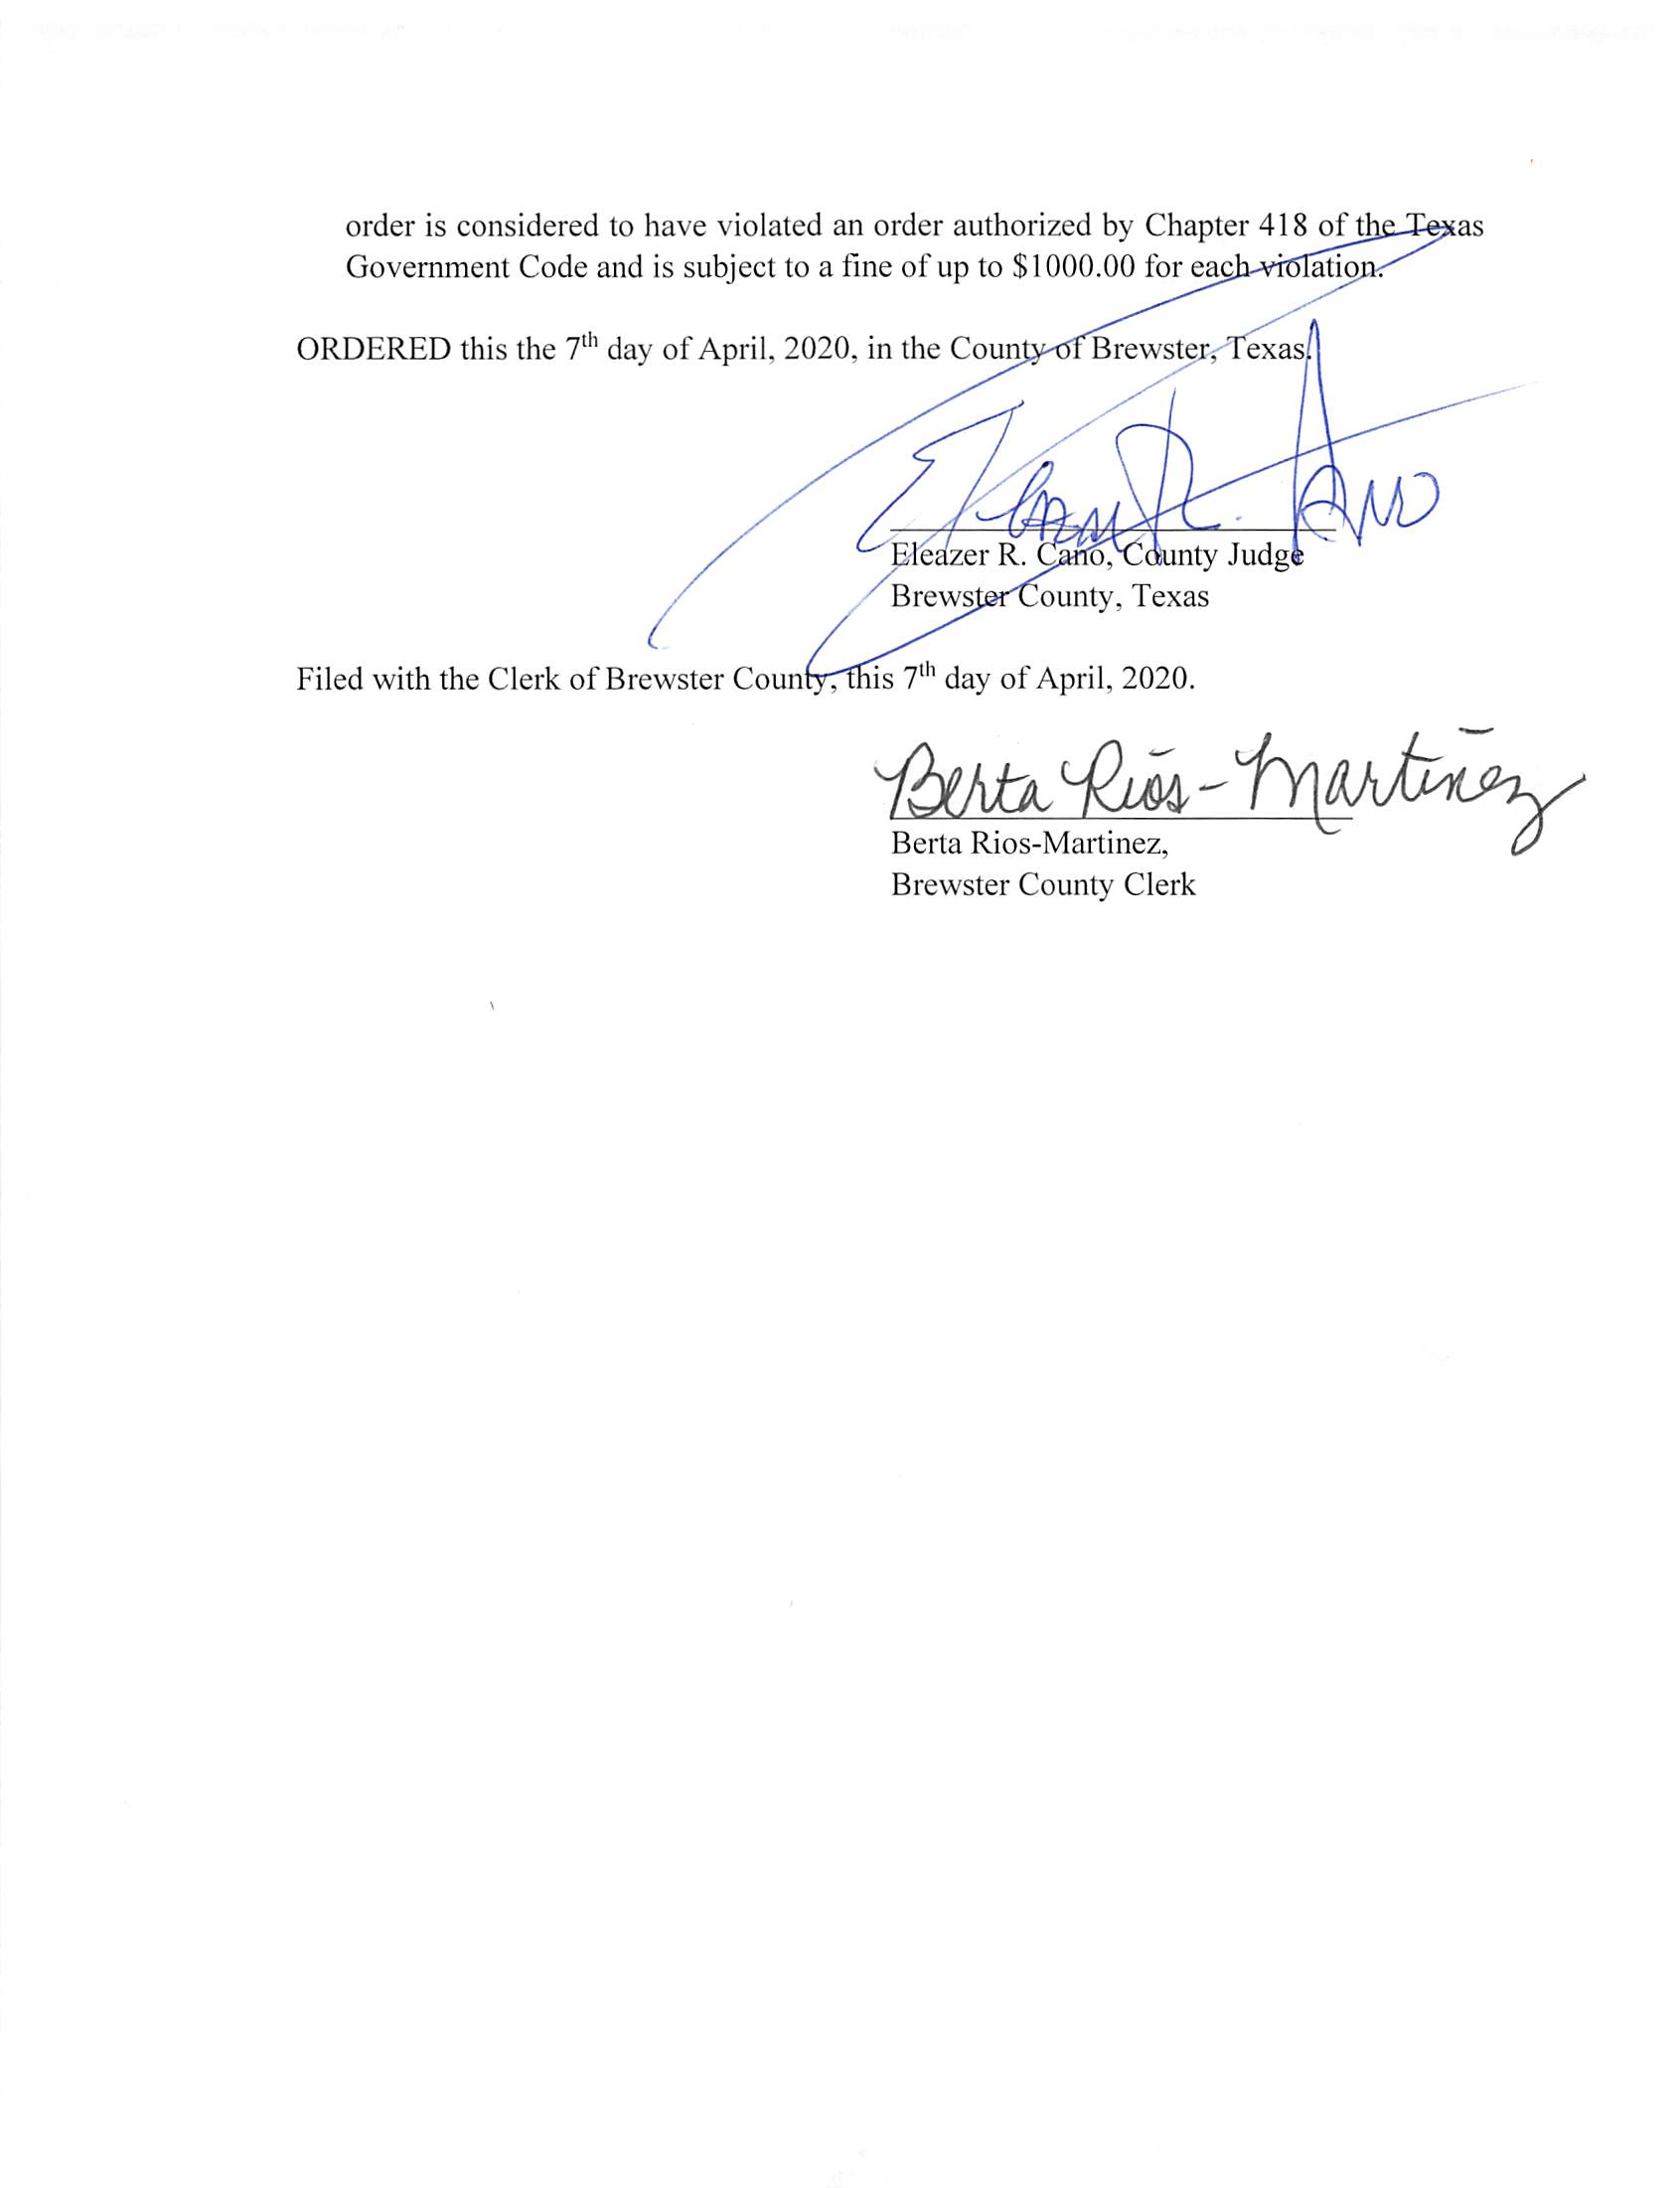 Orders Extending Supplemental on Shelter in Place & Declaration (1)_Page_7